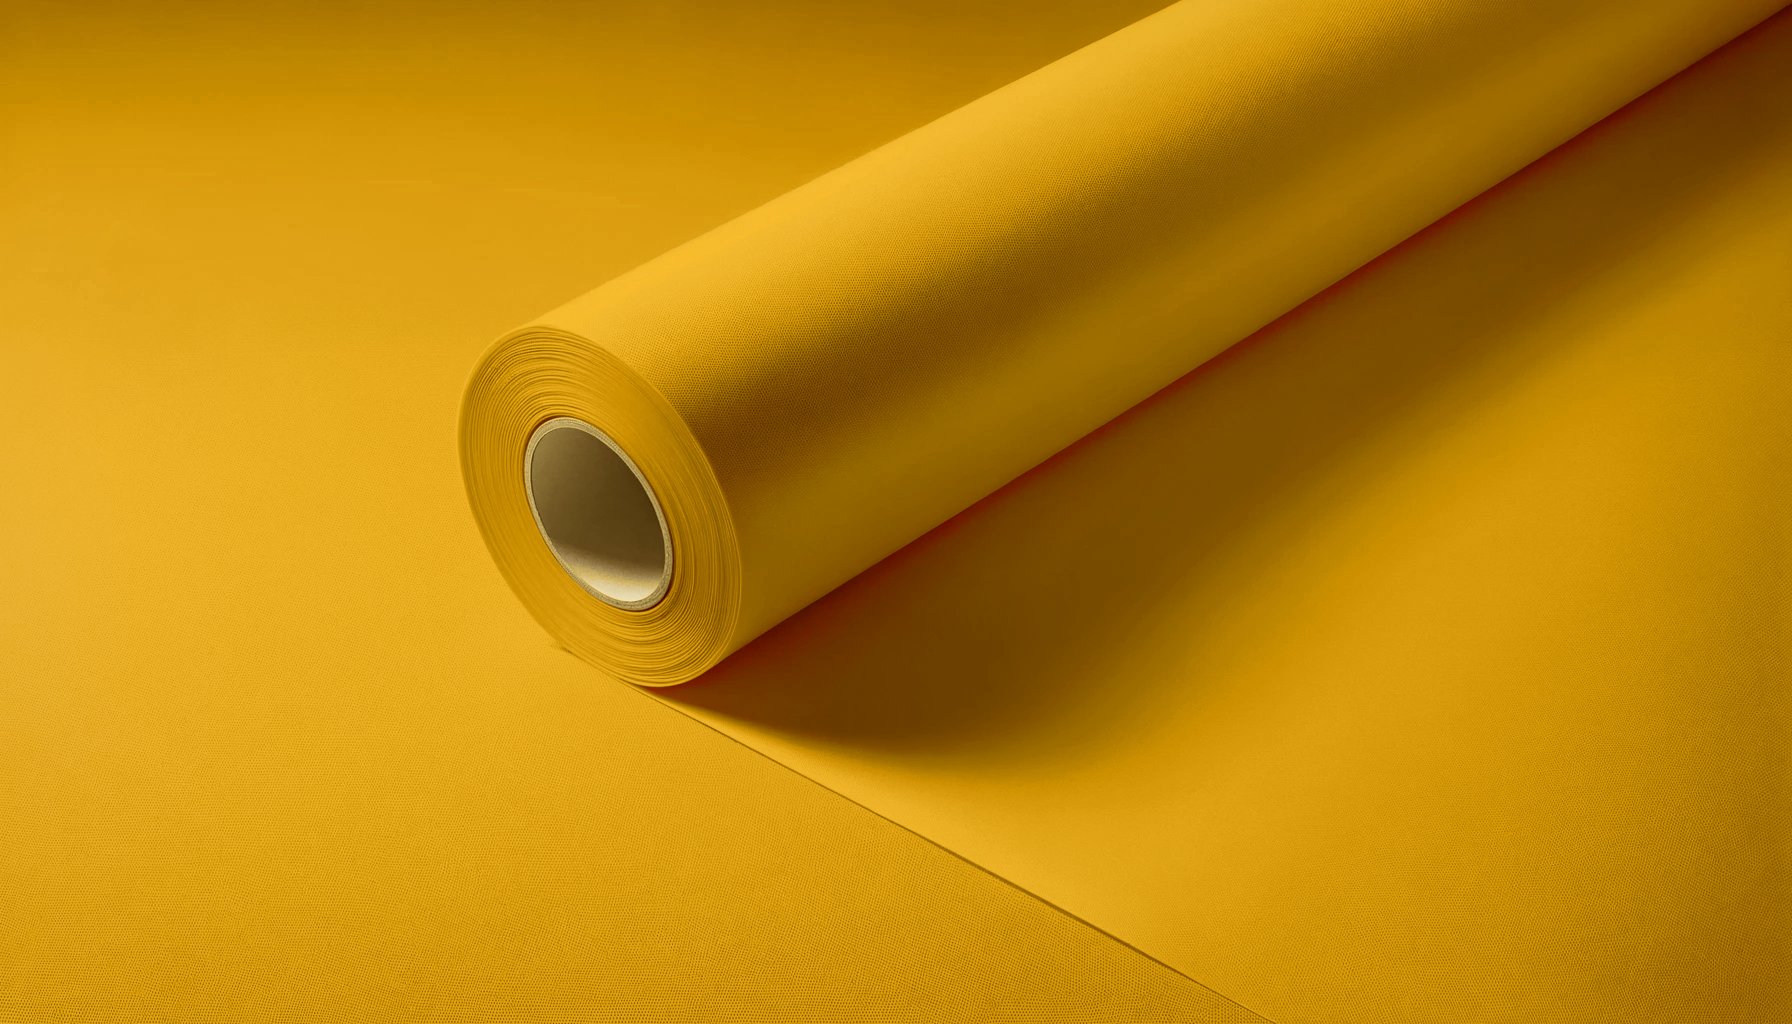 Peel & Stick Removable Re-usable Paint - Color RAL 1005 Honey Yellow - offRAL™ - RALRAW LLC, USA